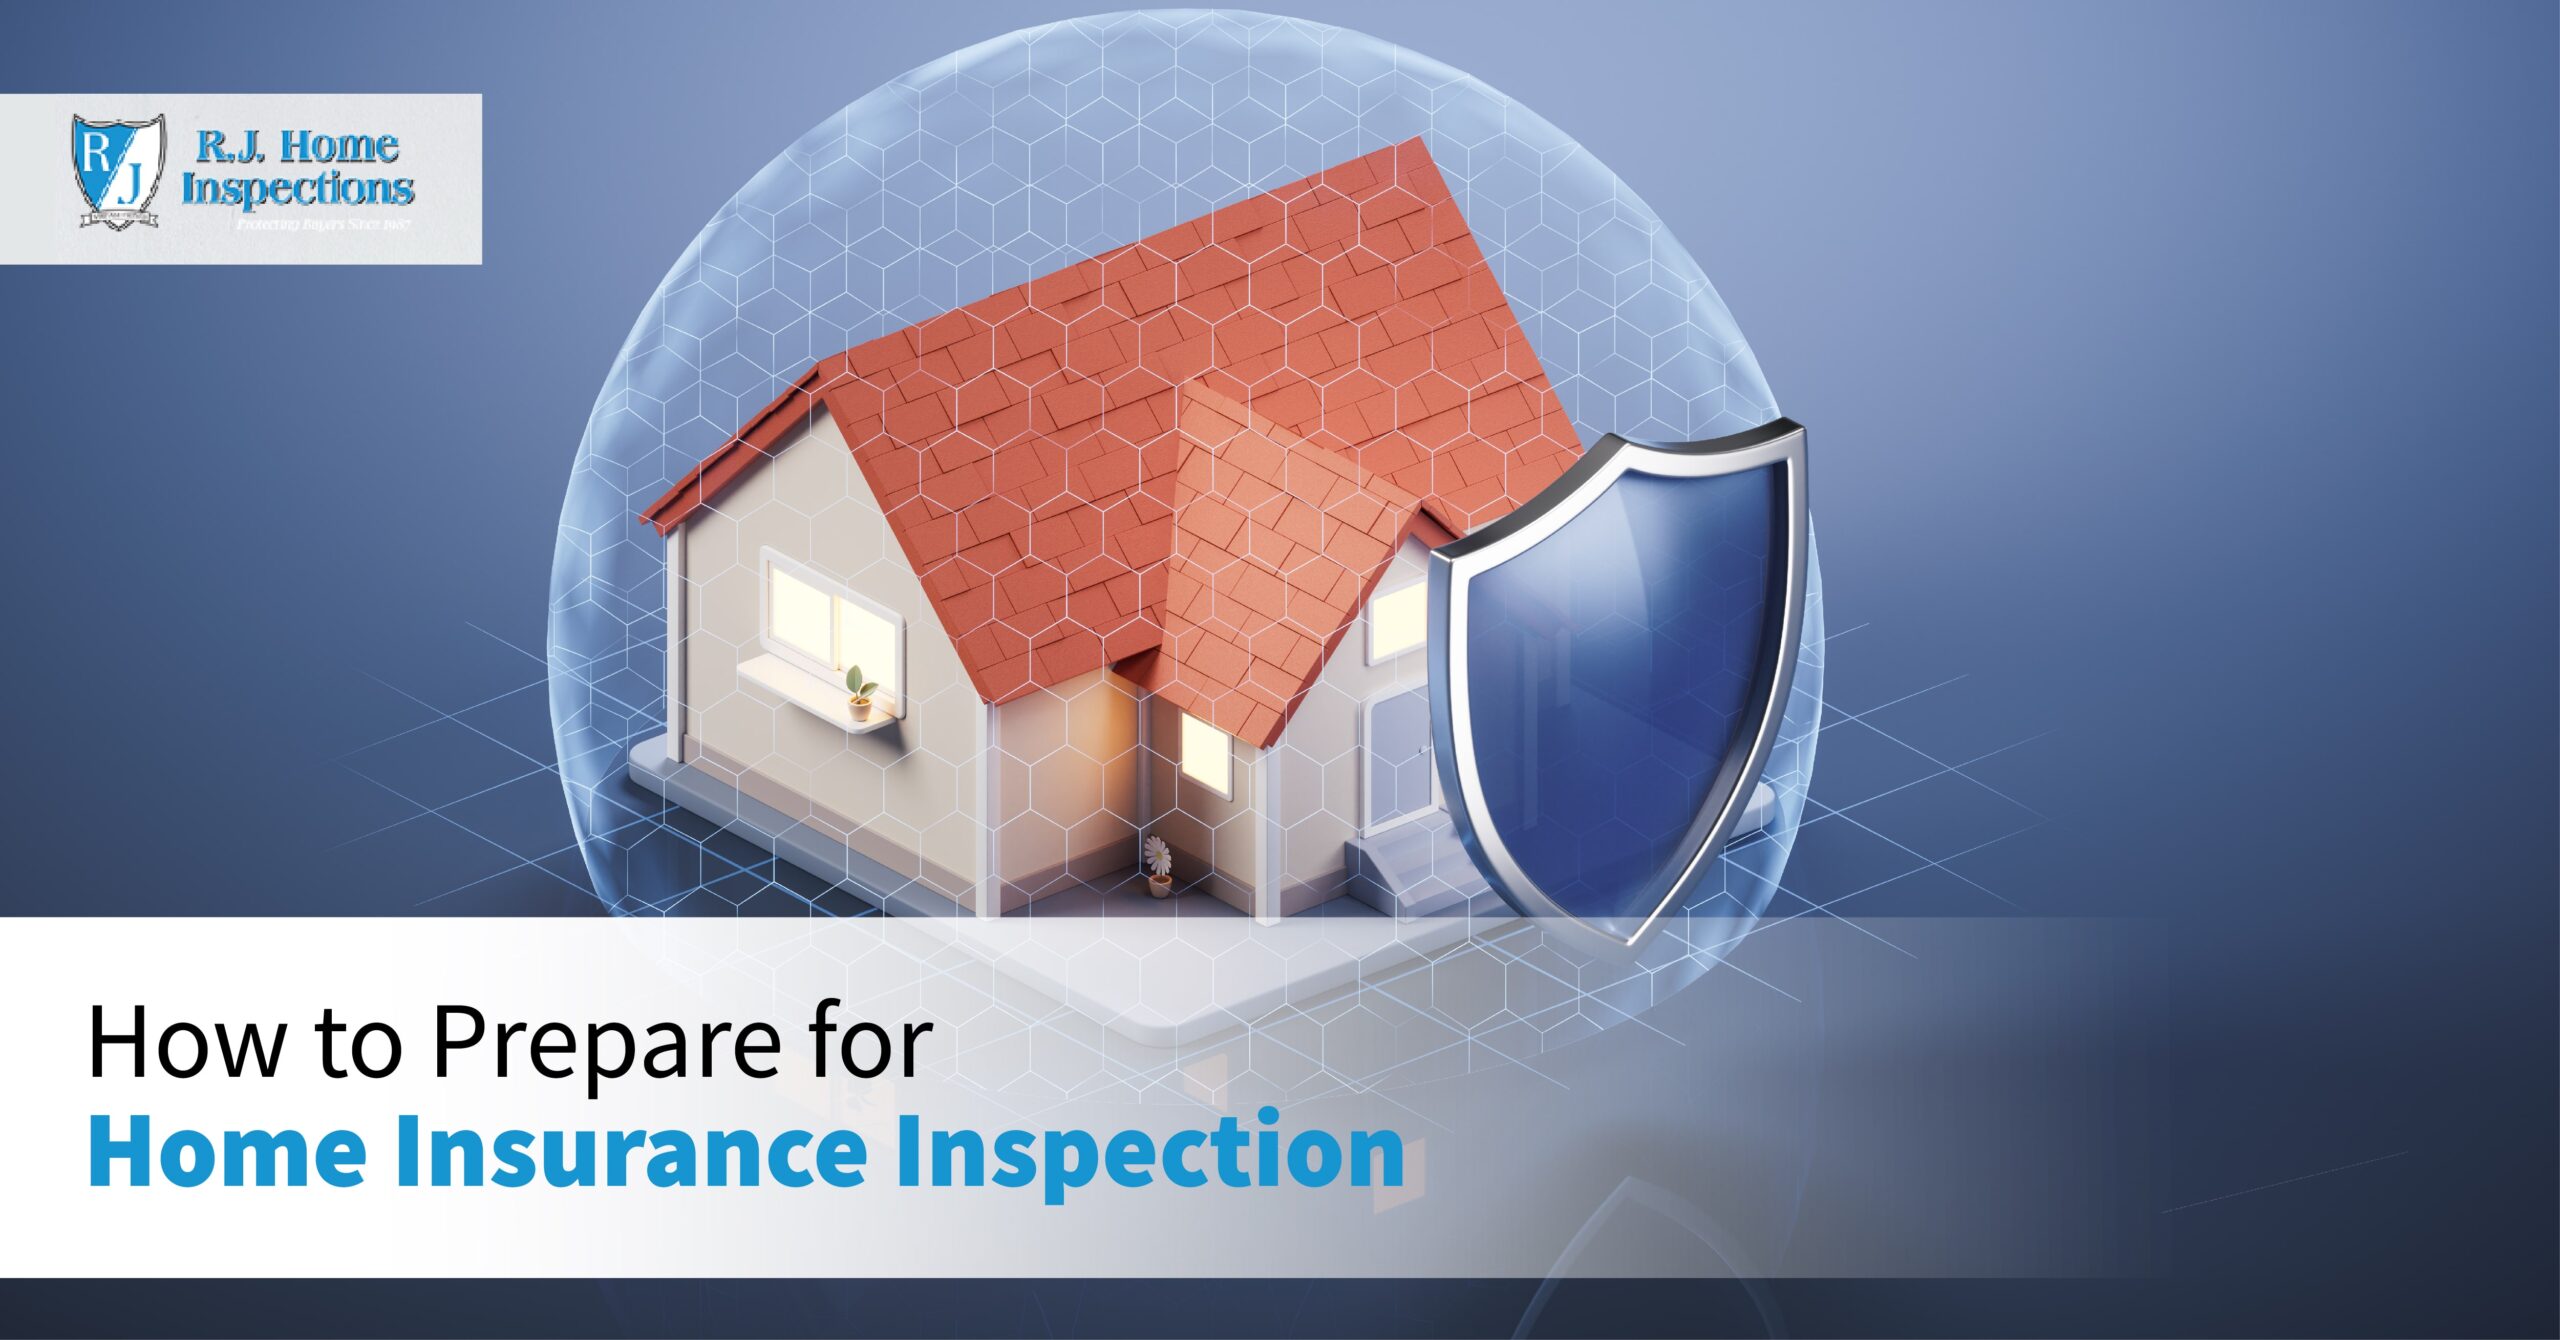 Home Insurance Inspection